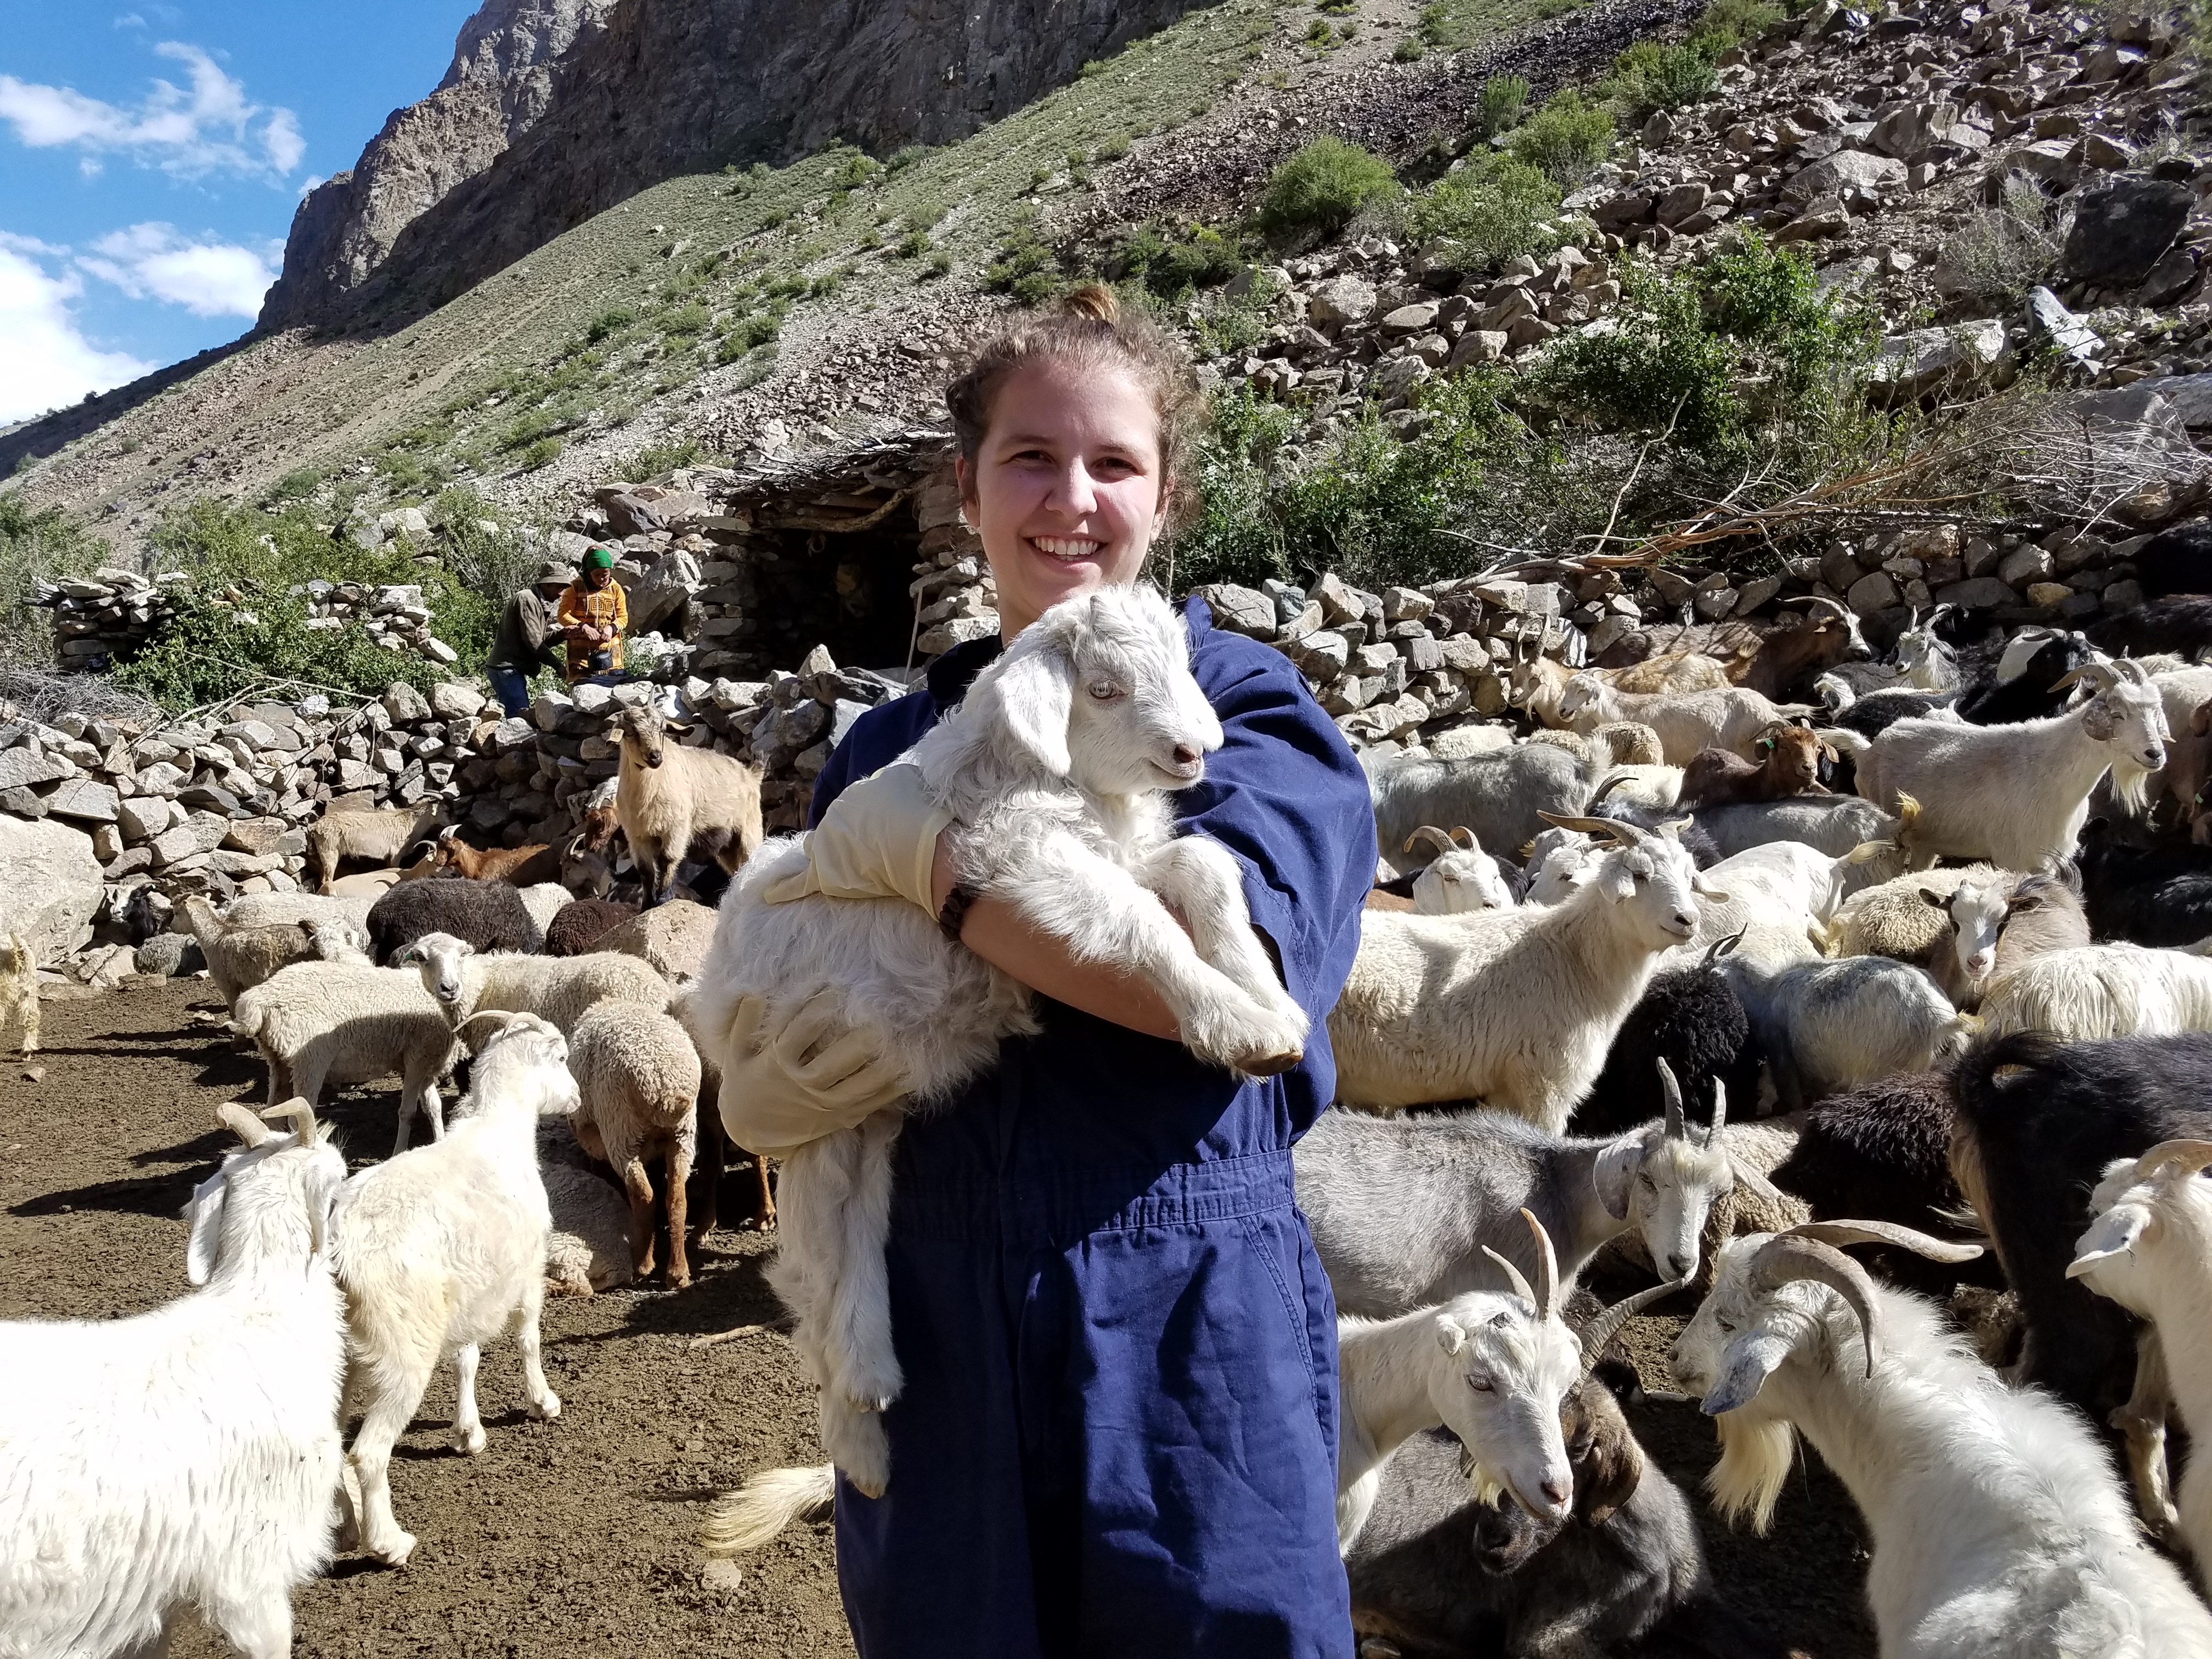 Ana Pantín during the livestock survey shown holding a lamb and surrounded by the herd.